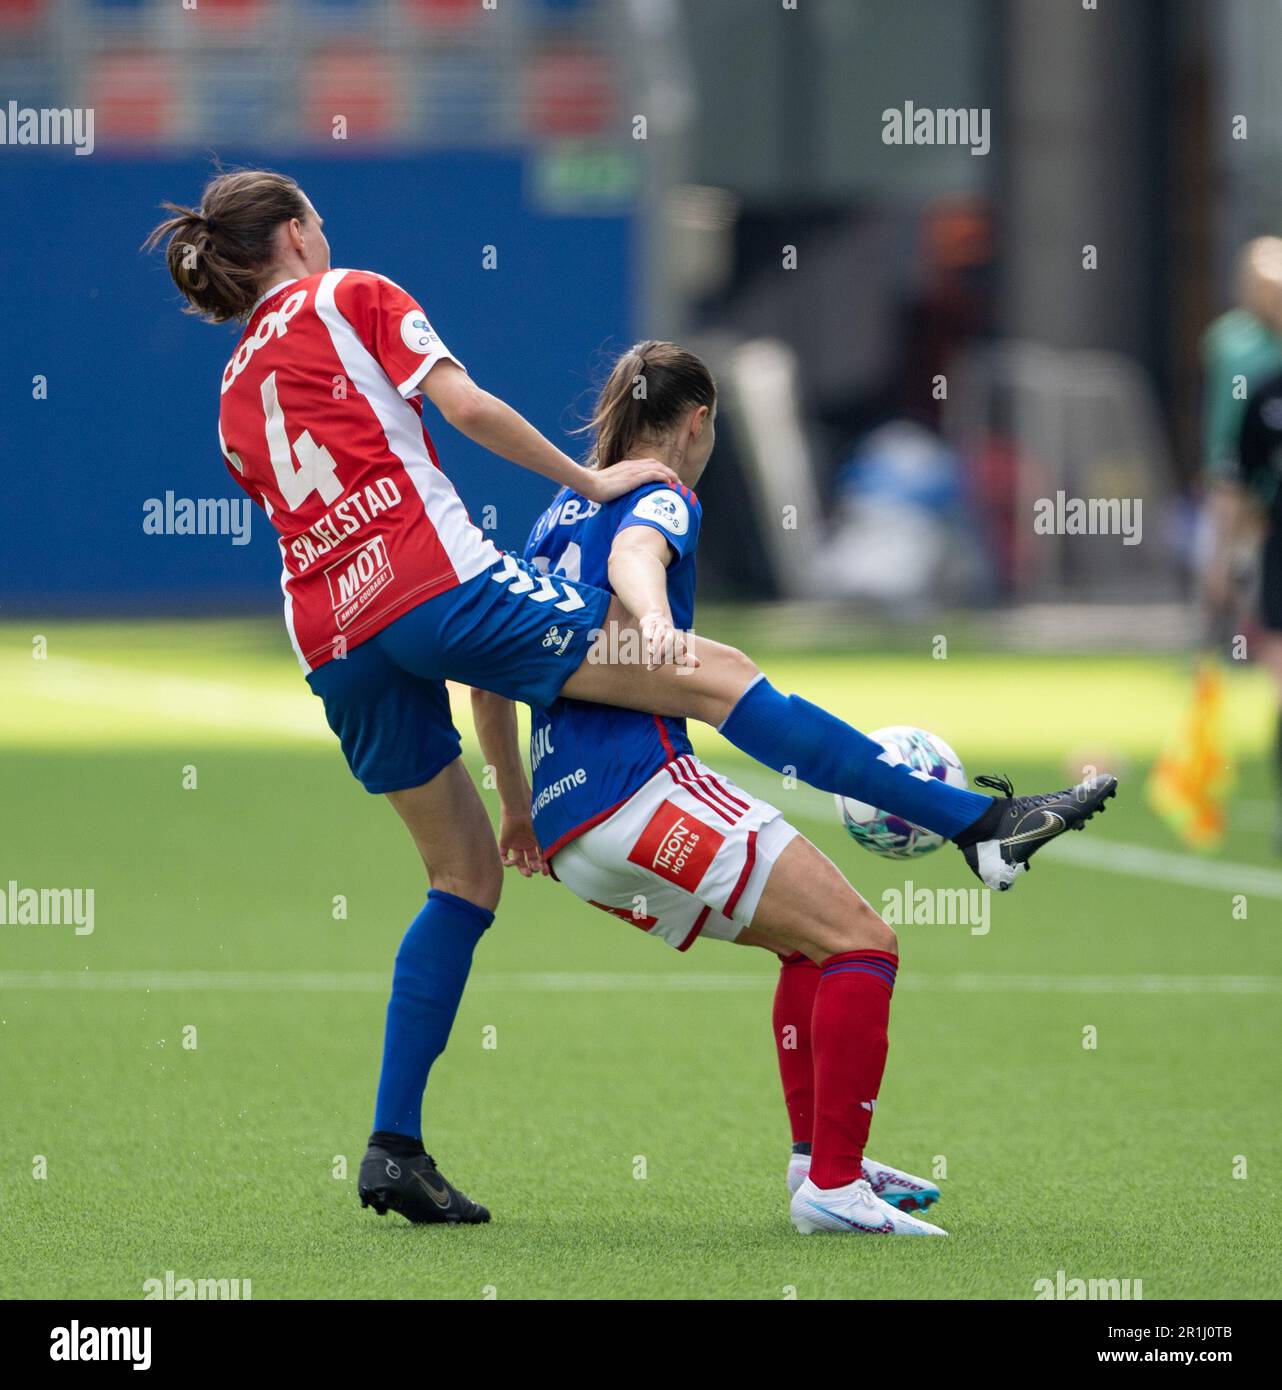 Oslo, Norway. 14th May, 2023. Oslo, Norway, May 14th 2023: Felicia Rogic (22 Valerenga) battle for the ball during the Toppserien league game between Valerenga and Lyn at Intility Arena in Oslo, Norway (Ane Frosaker/SPP) Credit: SPP Sport Press Photo. /Alamy Live News Stock Photo